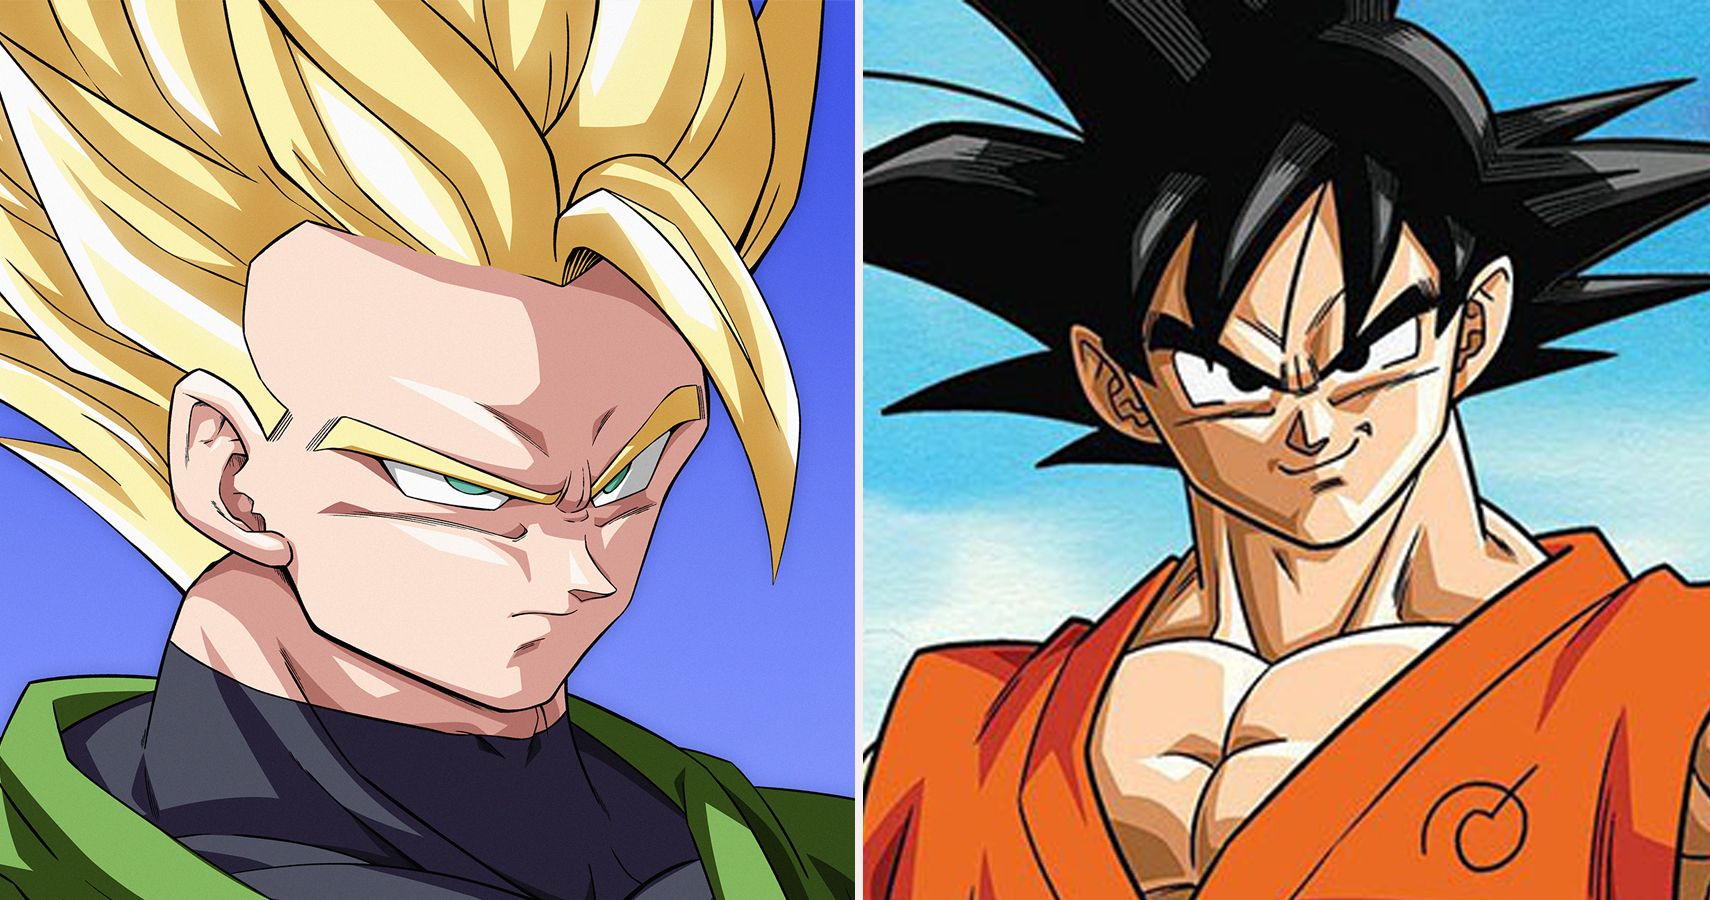 There's one other Dragon Ball Z character who holds an equal standing